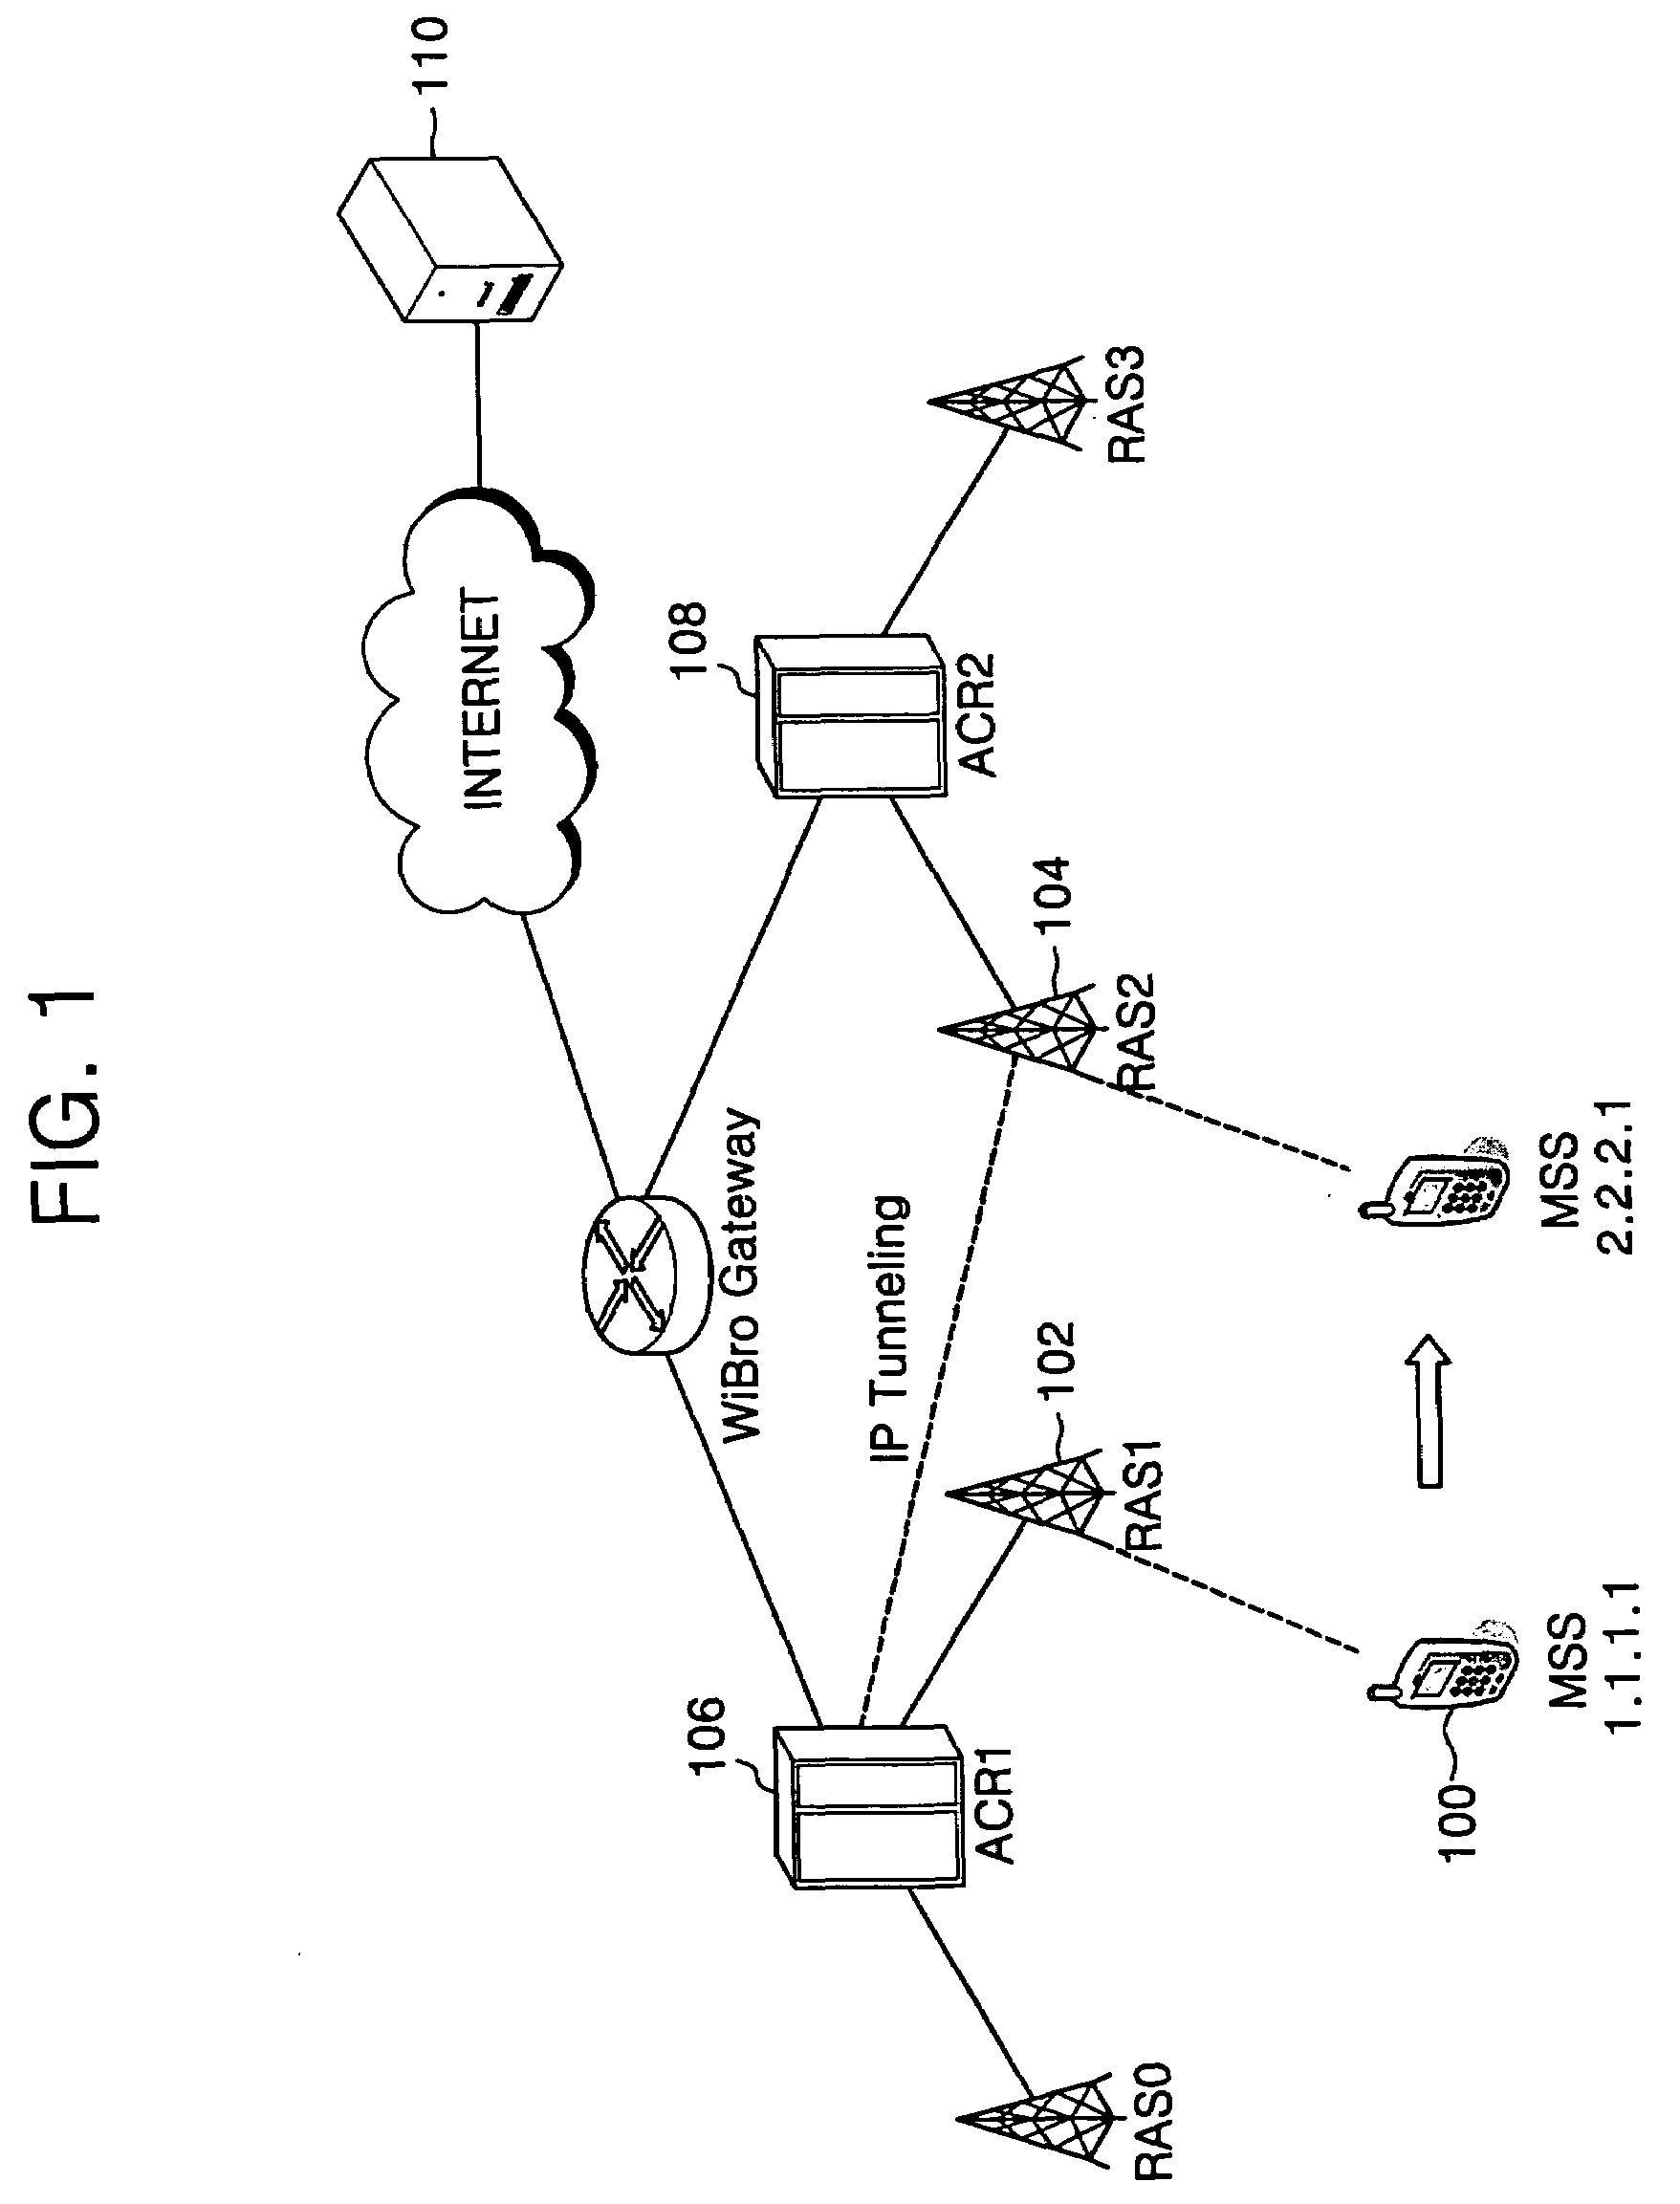 Wireless broadband Internet system and its method of terminal hand-off